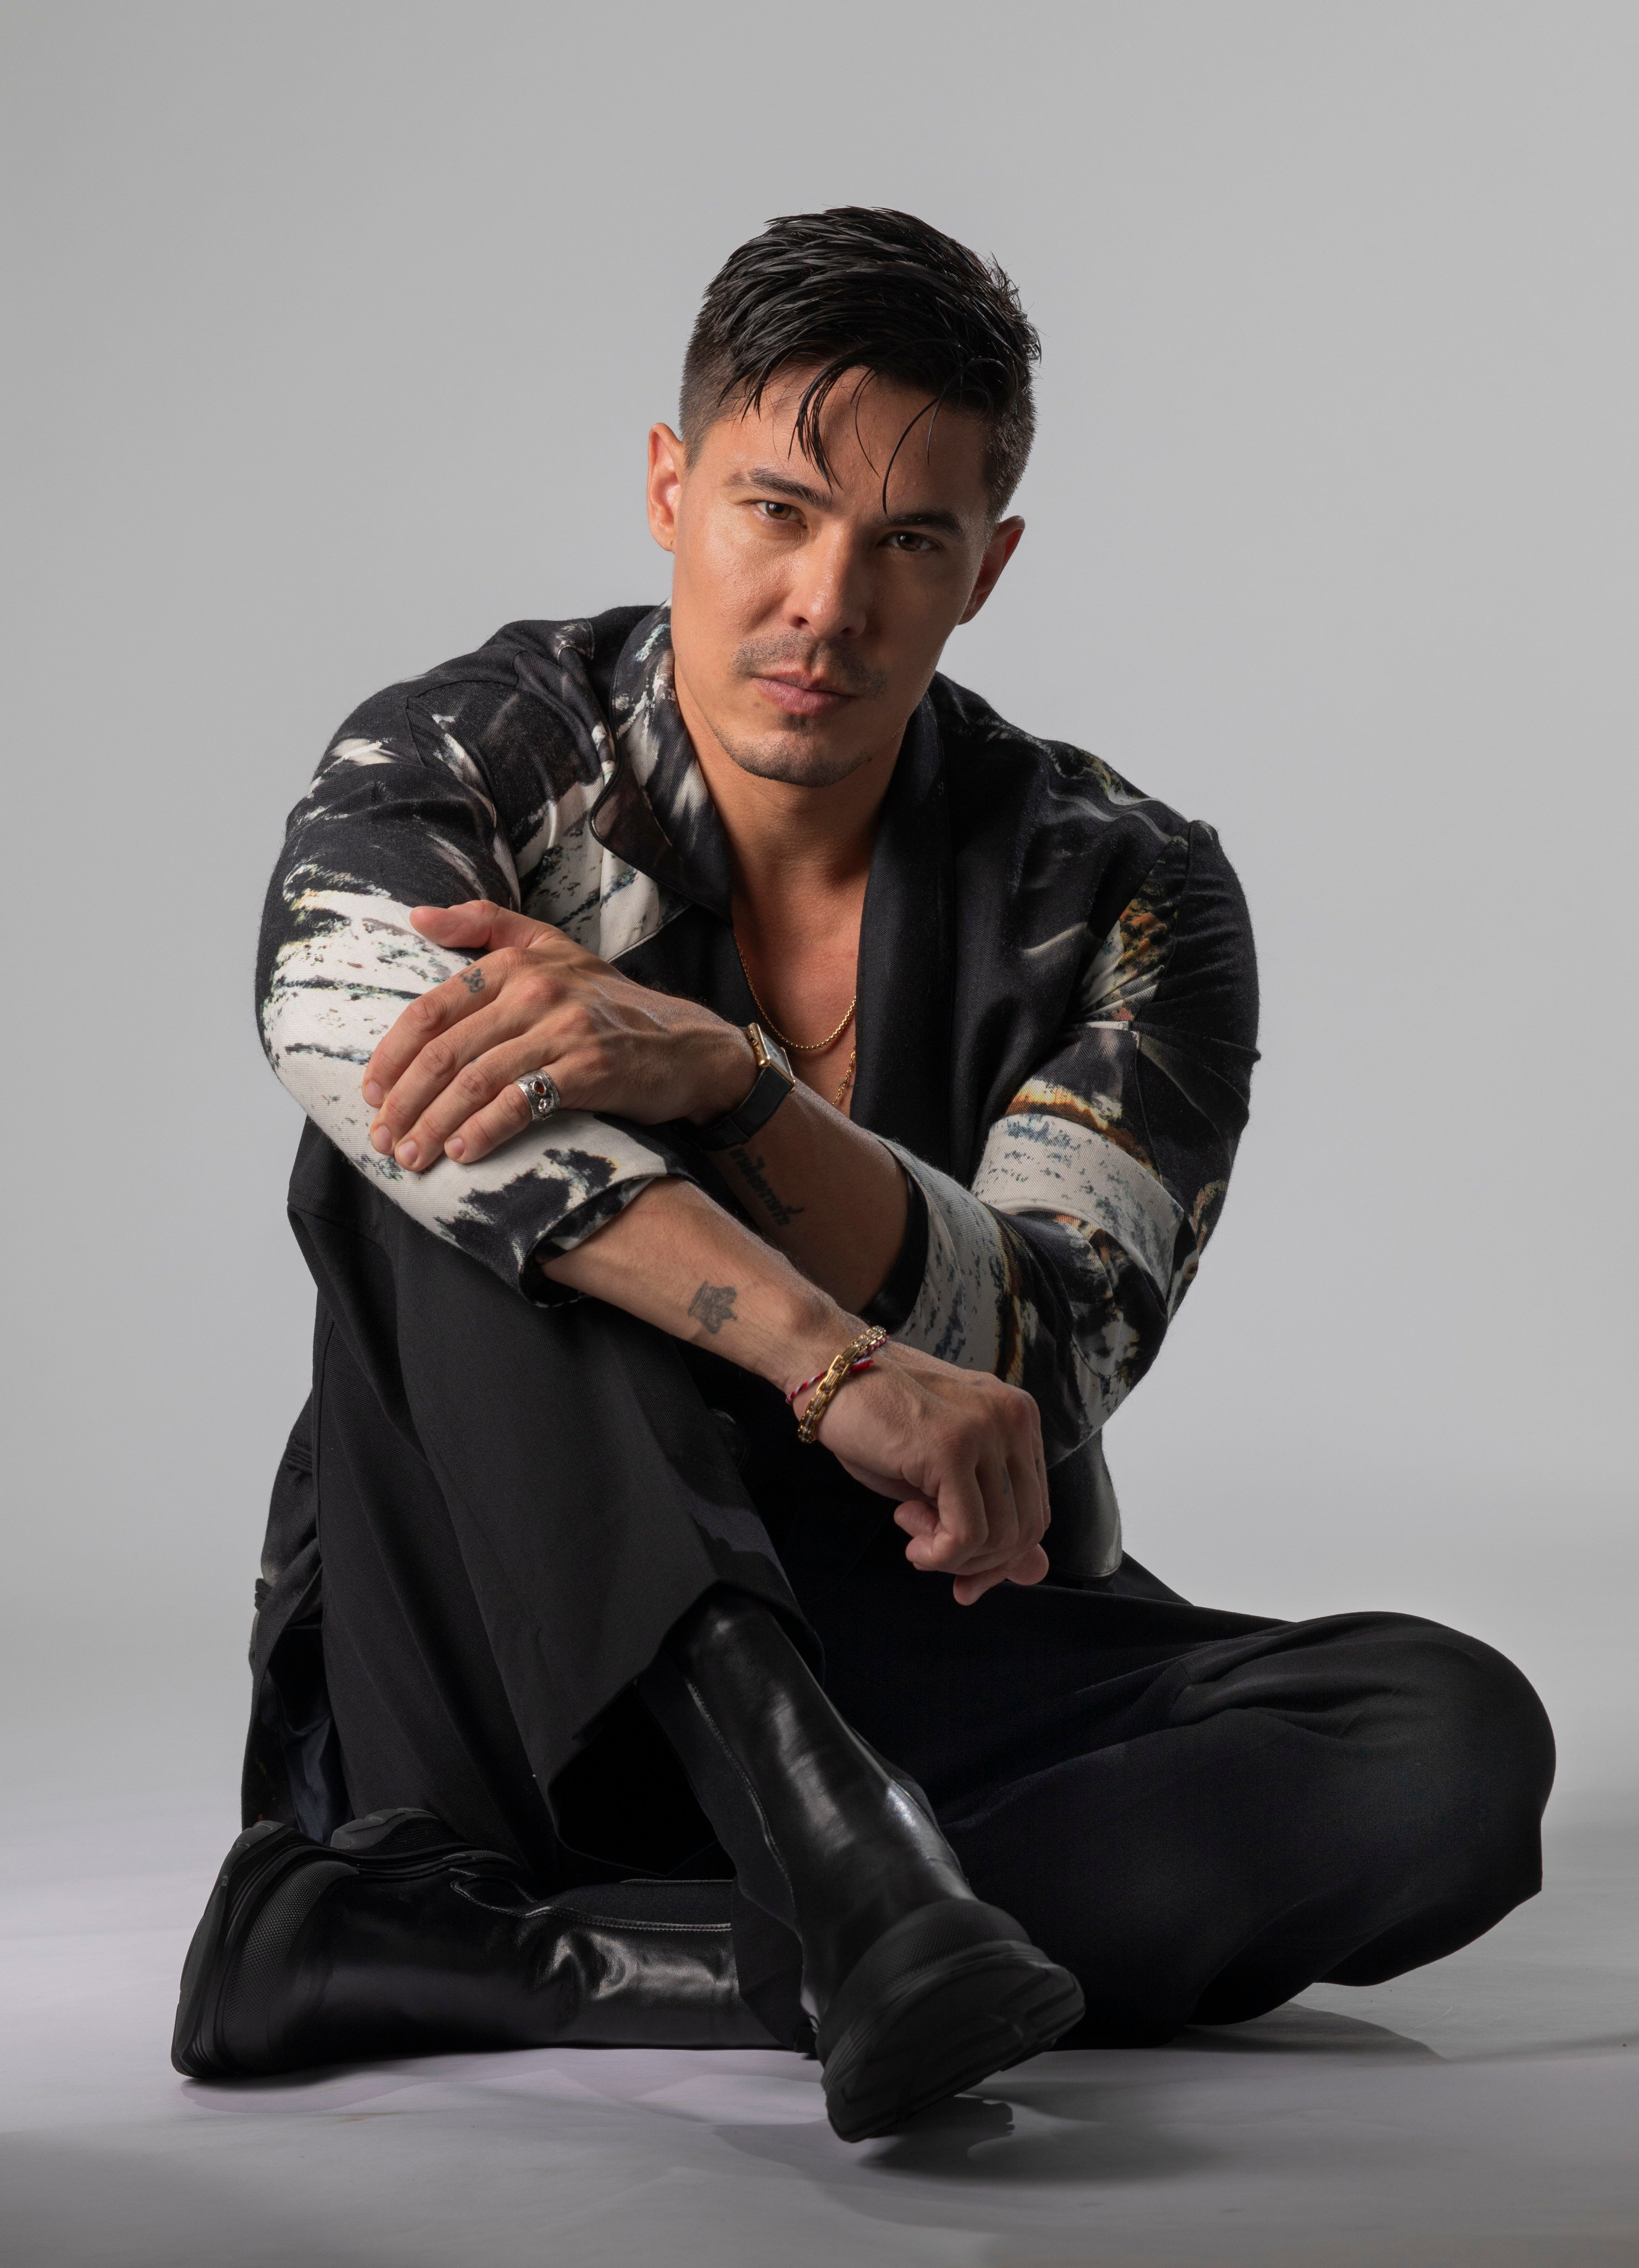 Lewis Tan, the English actor and martial artist, credits his dad for the skills which helped him succeed – and now he wants to make a film about Tan Snr. Photography by Antony Dickson; styling Vincent Li; styling assistant Bonnie Cheung; grooming Gloomy Kwok 

